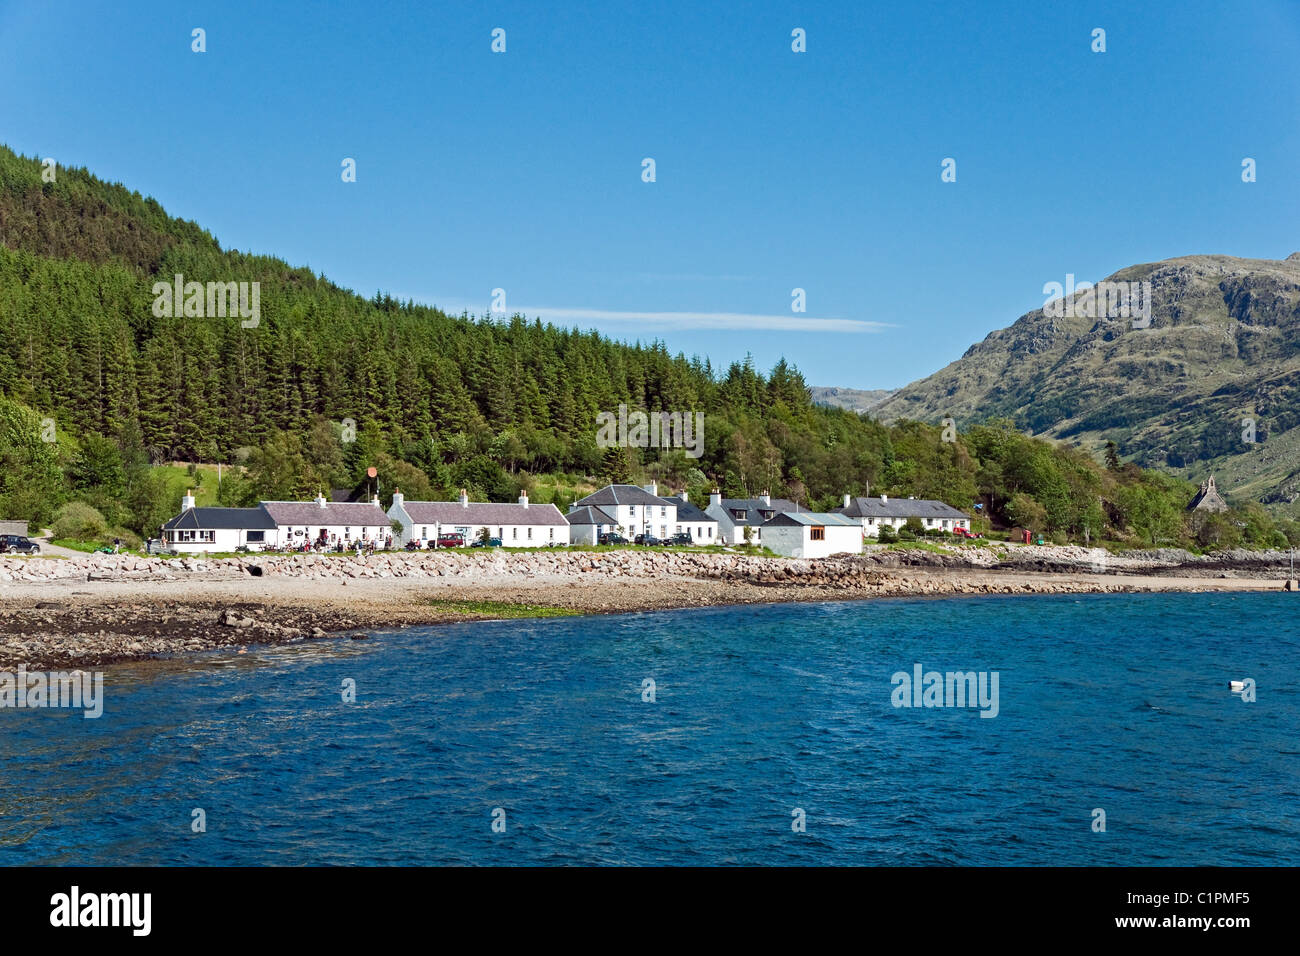 The small settlement of Inverie in Knoydart Highland of Scotland seen from Loch Nevis Stock Photo